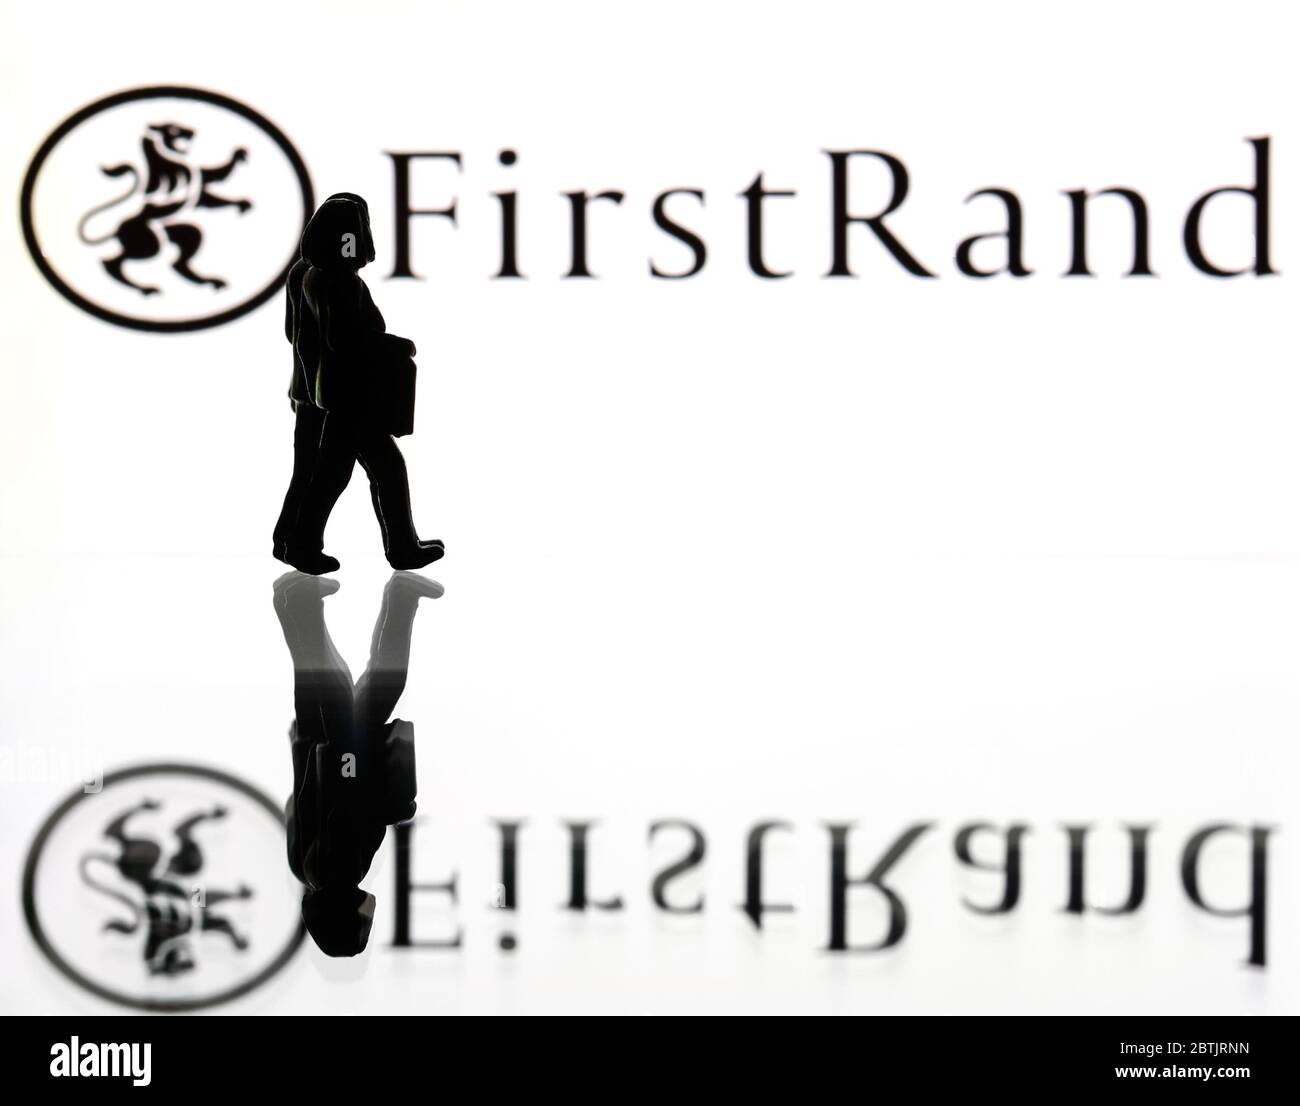 silhouettes in front of the logo for FirstRand group.  (editorial use only) Stock Photo